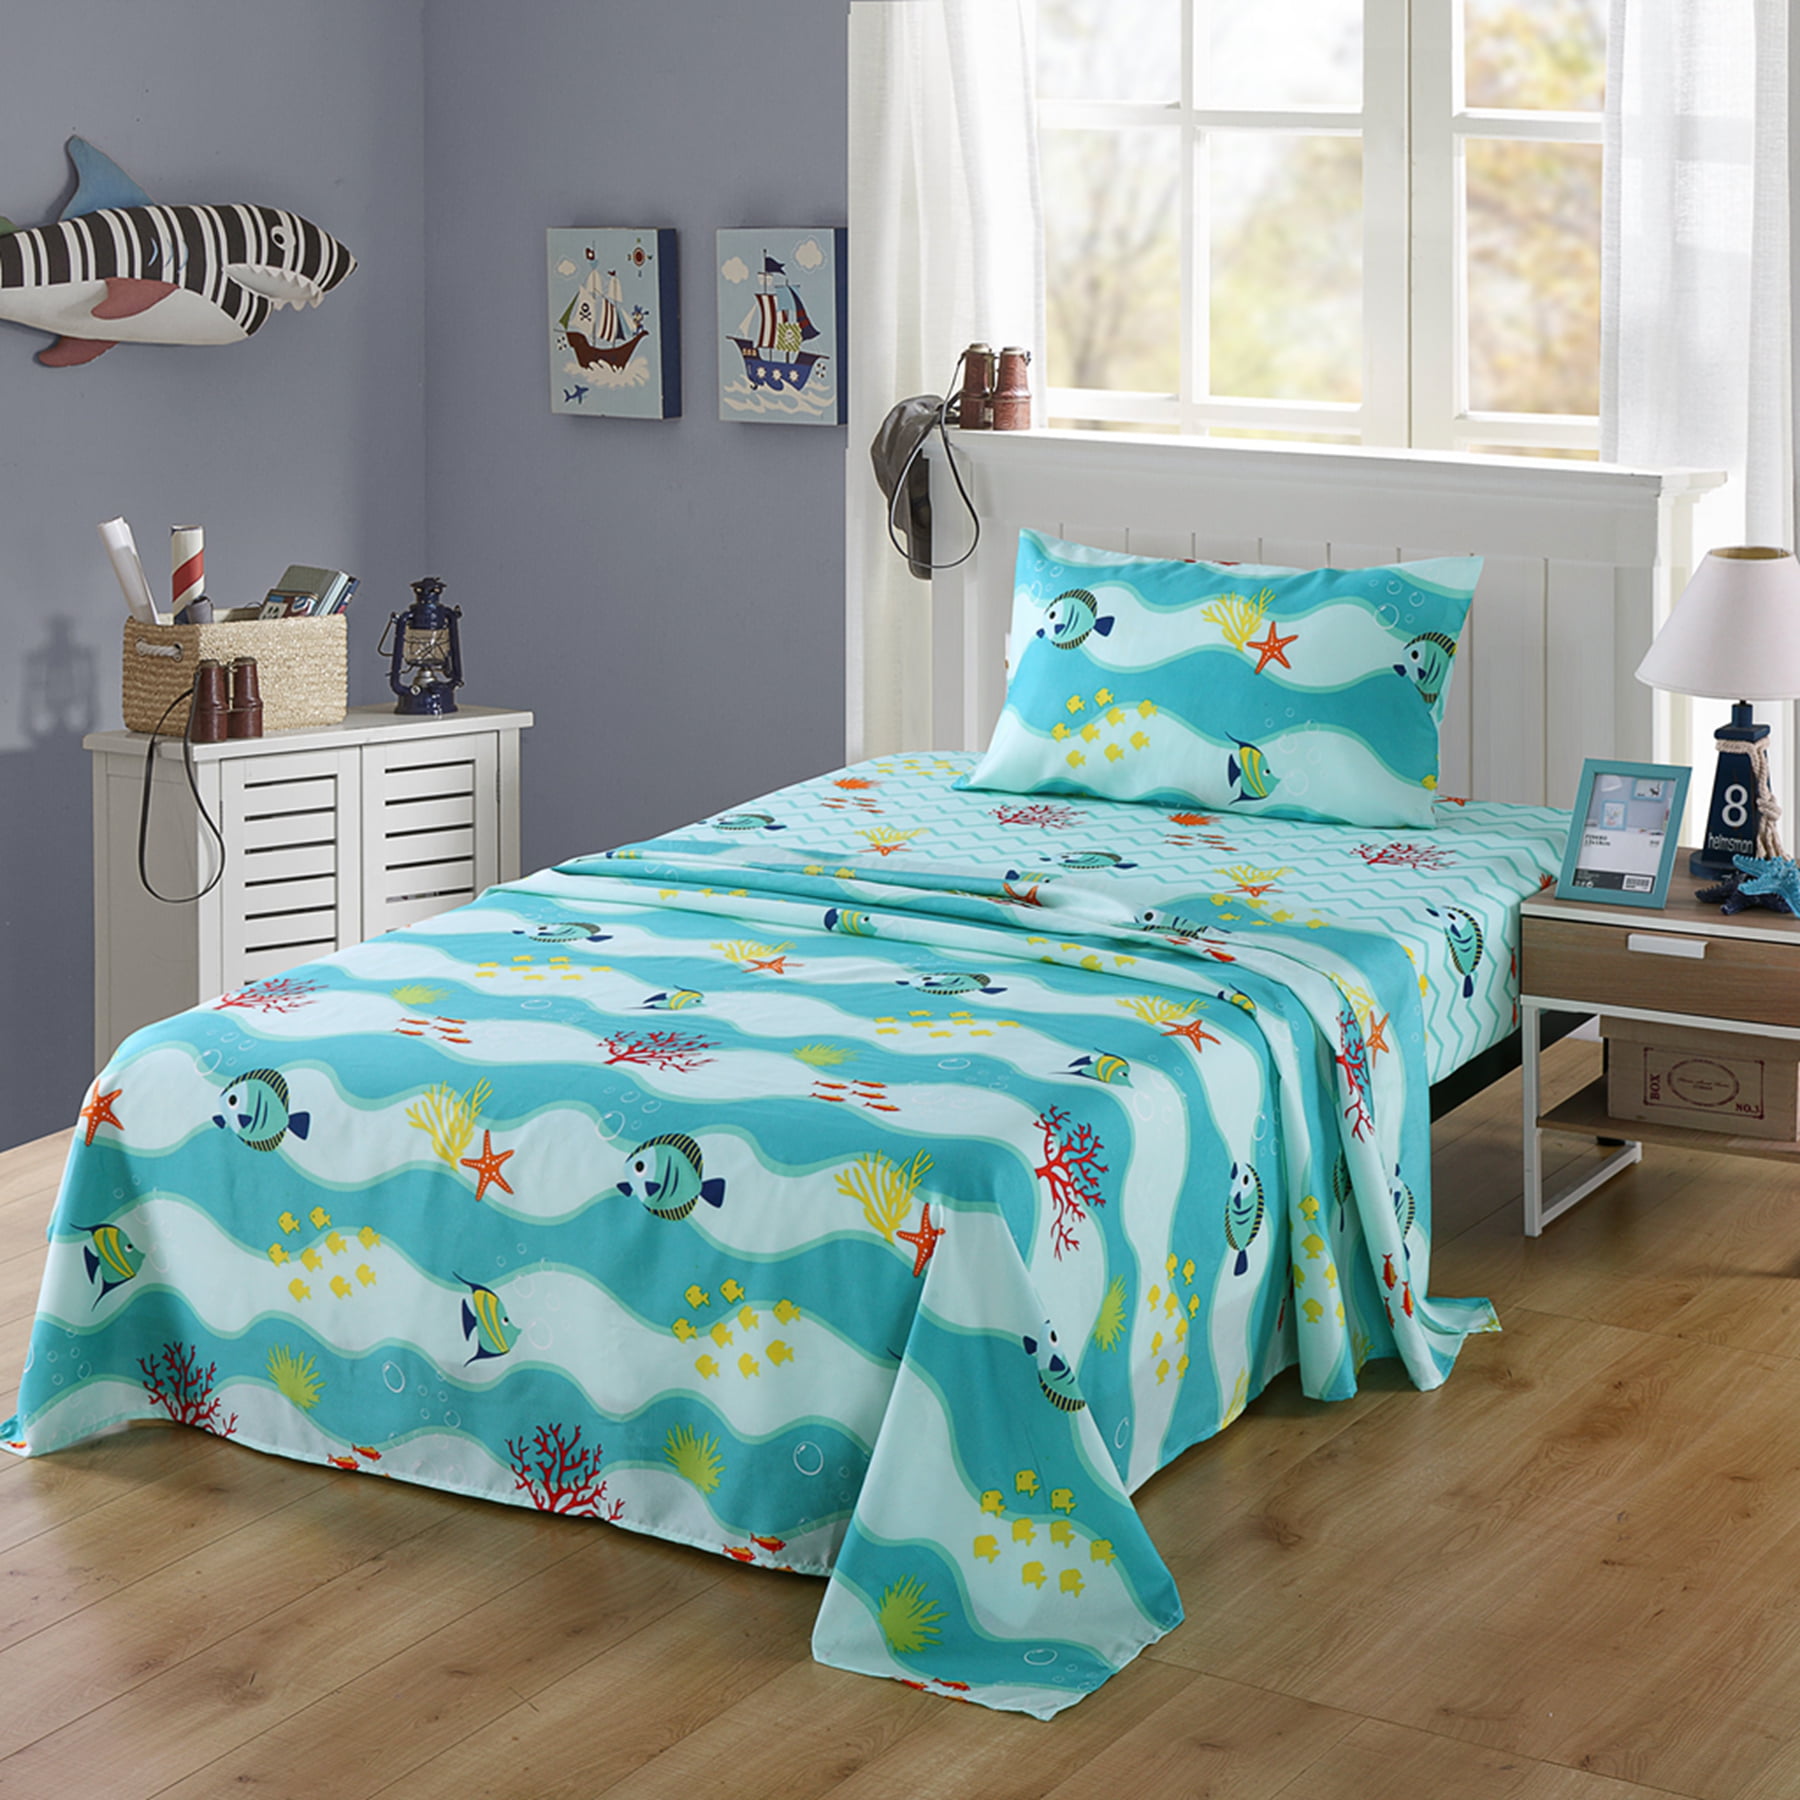 Twin Bed Sheet Satin Twin Fitted Bed Sheet for Toddler Bed Twin Bed Daybed to retain Hair Moisture Size 